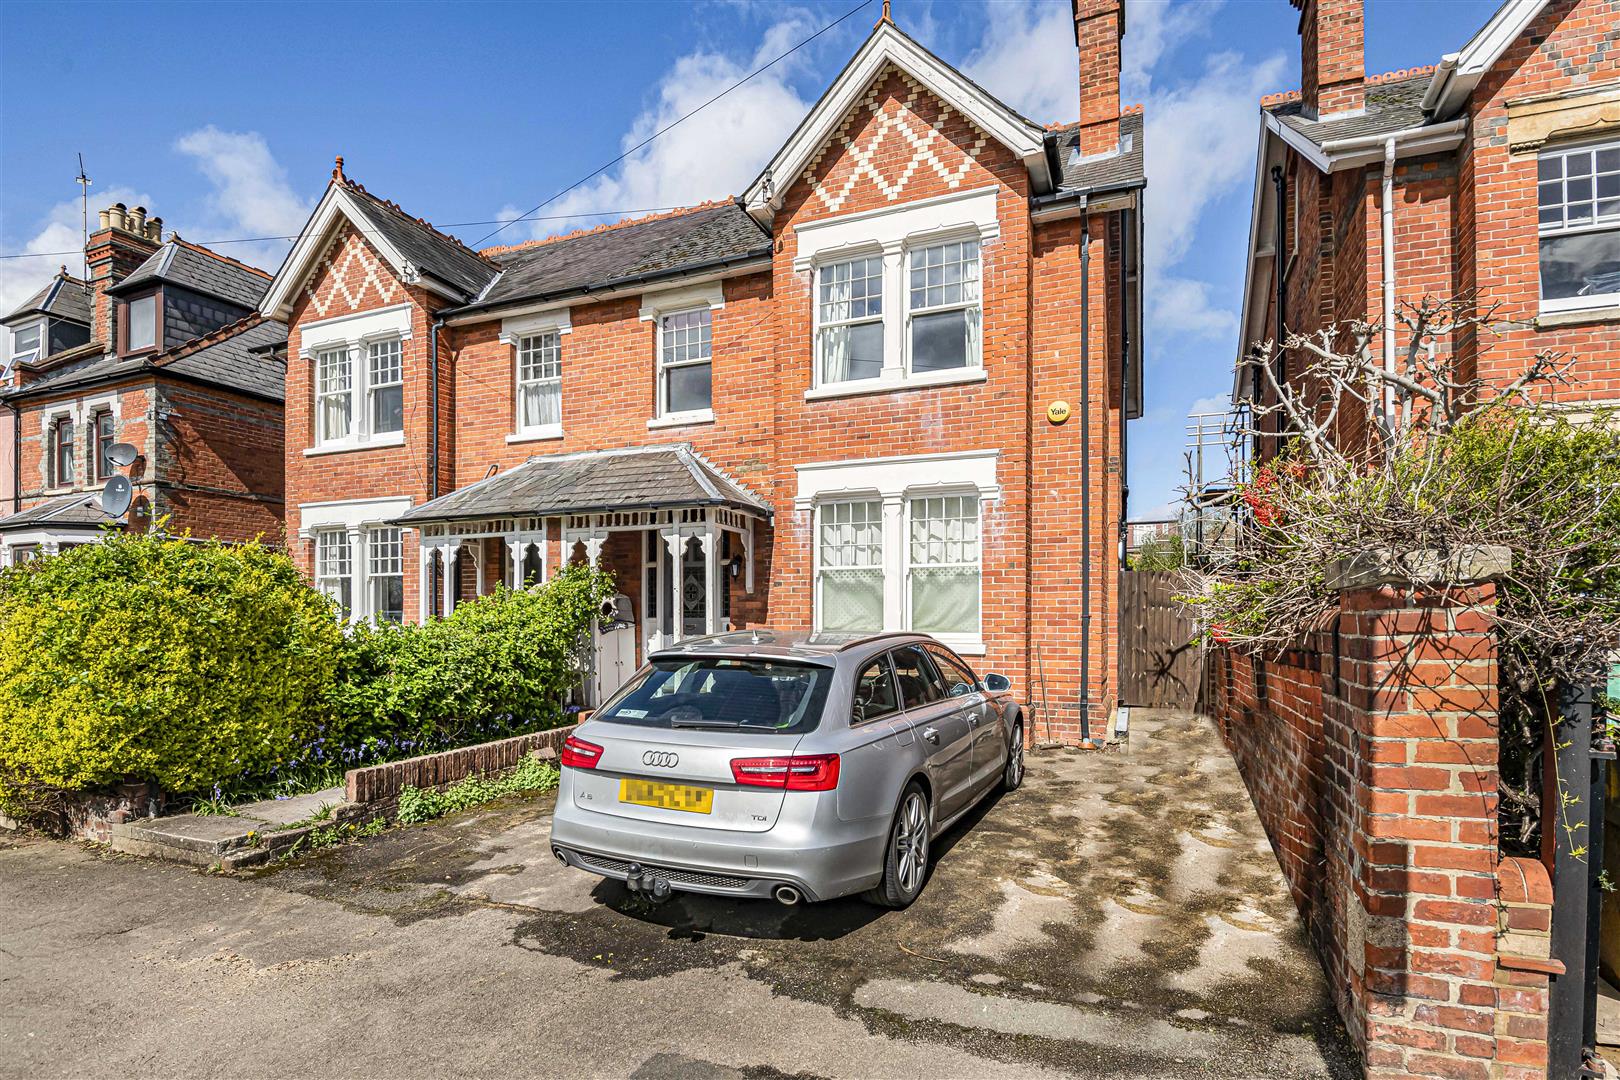 South View Avenue Caversham house for sale in Reading